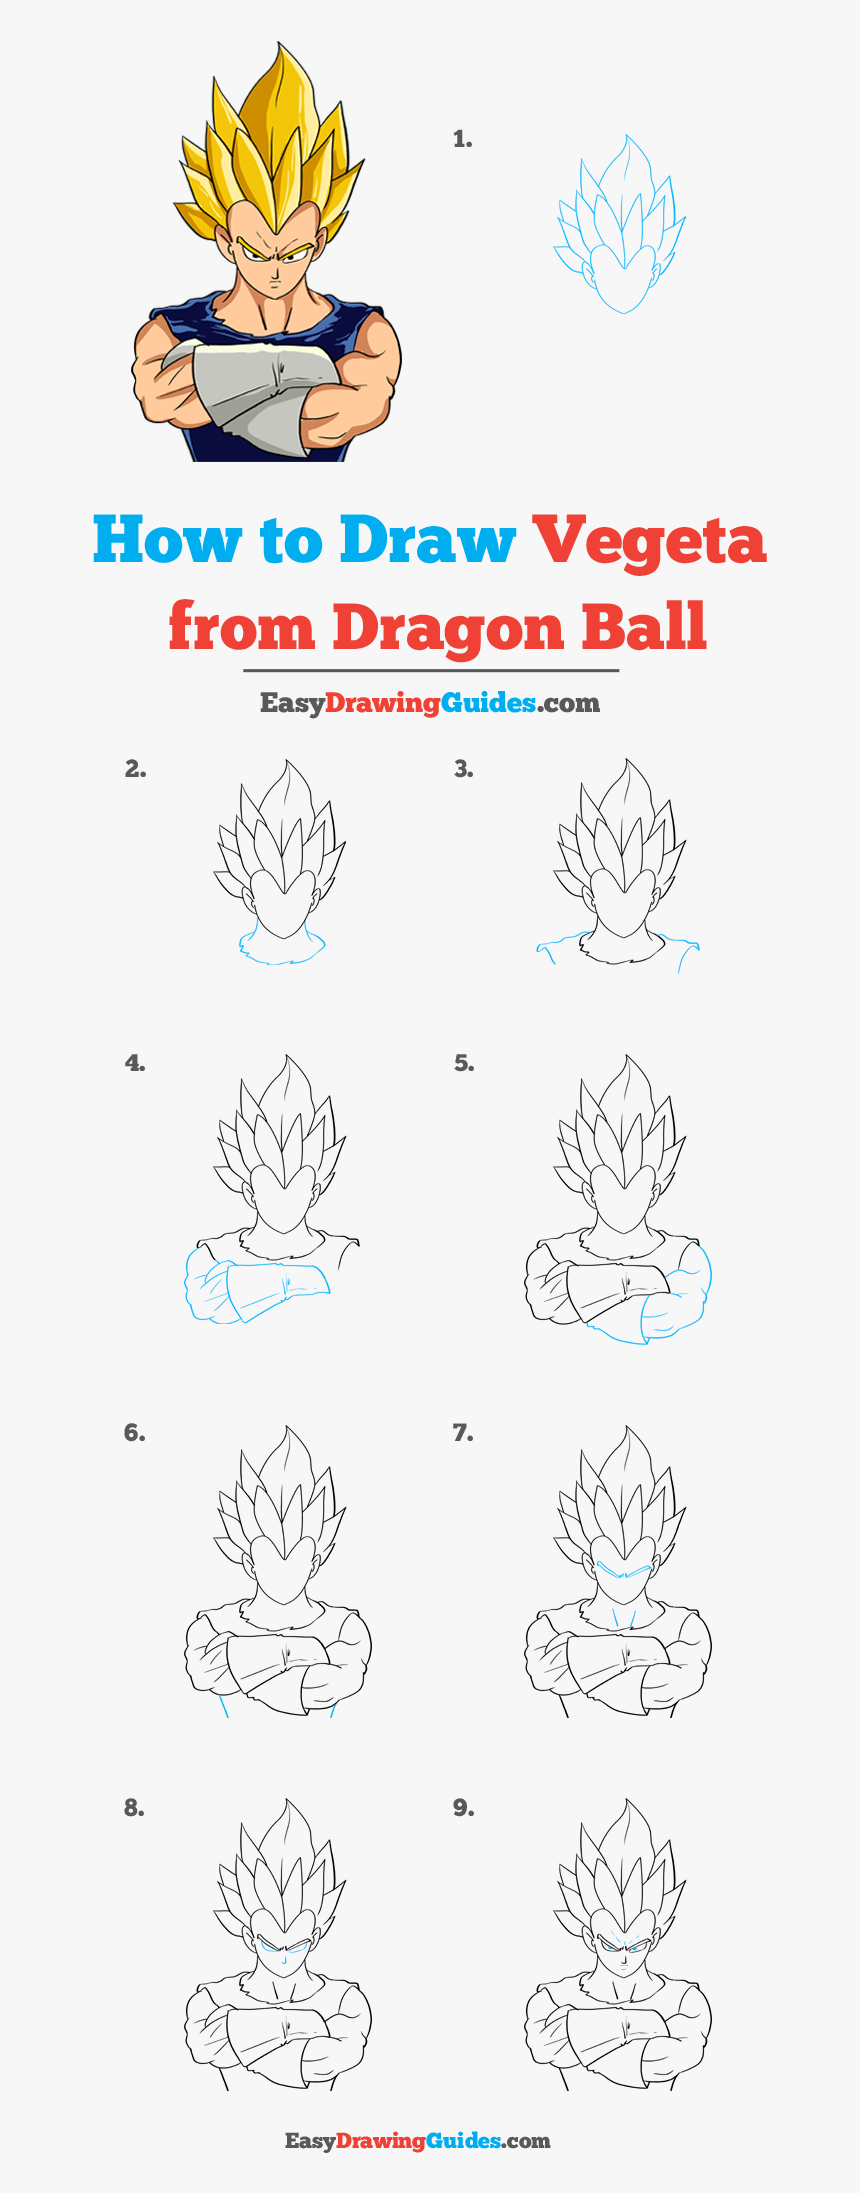 How To Draw Vegeta From Dragon Ball - Dragon Ball Drawing Easy